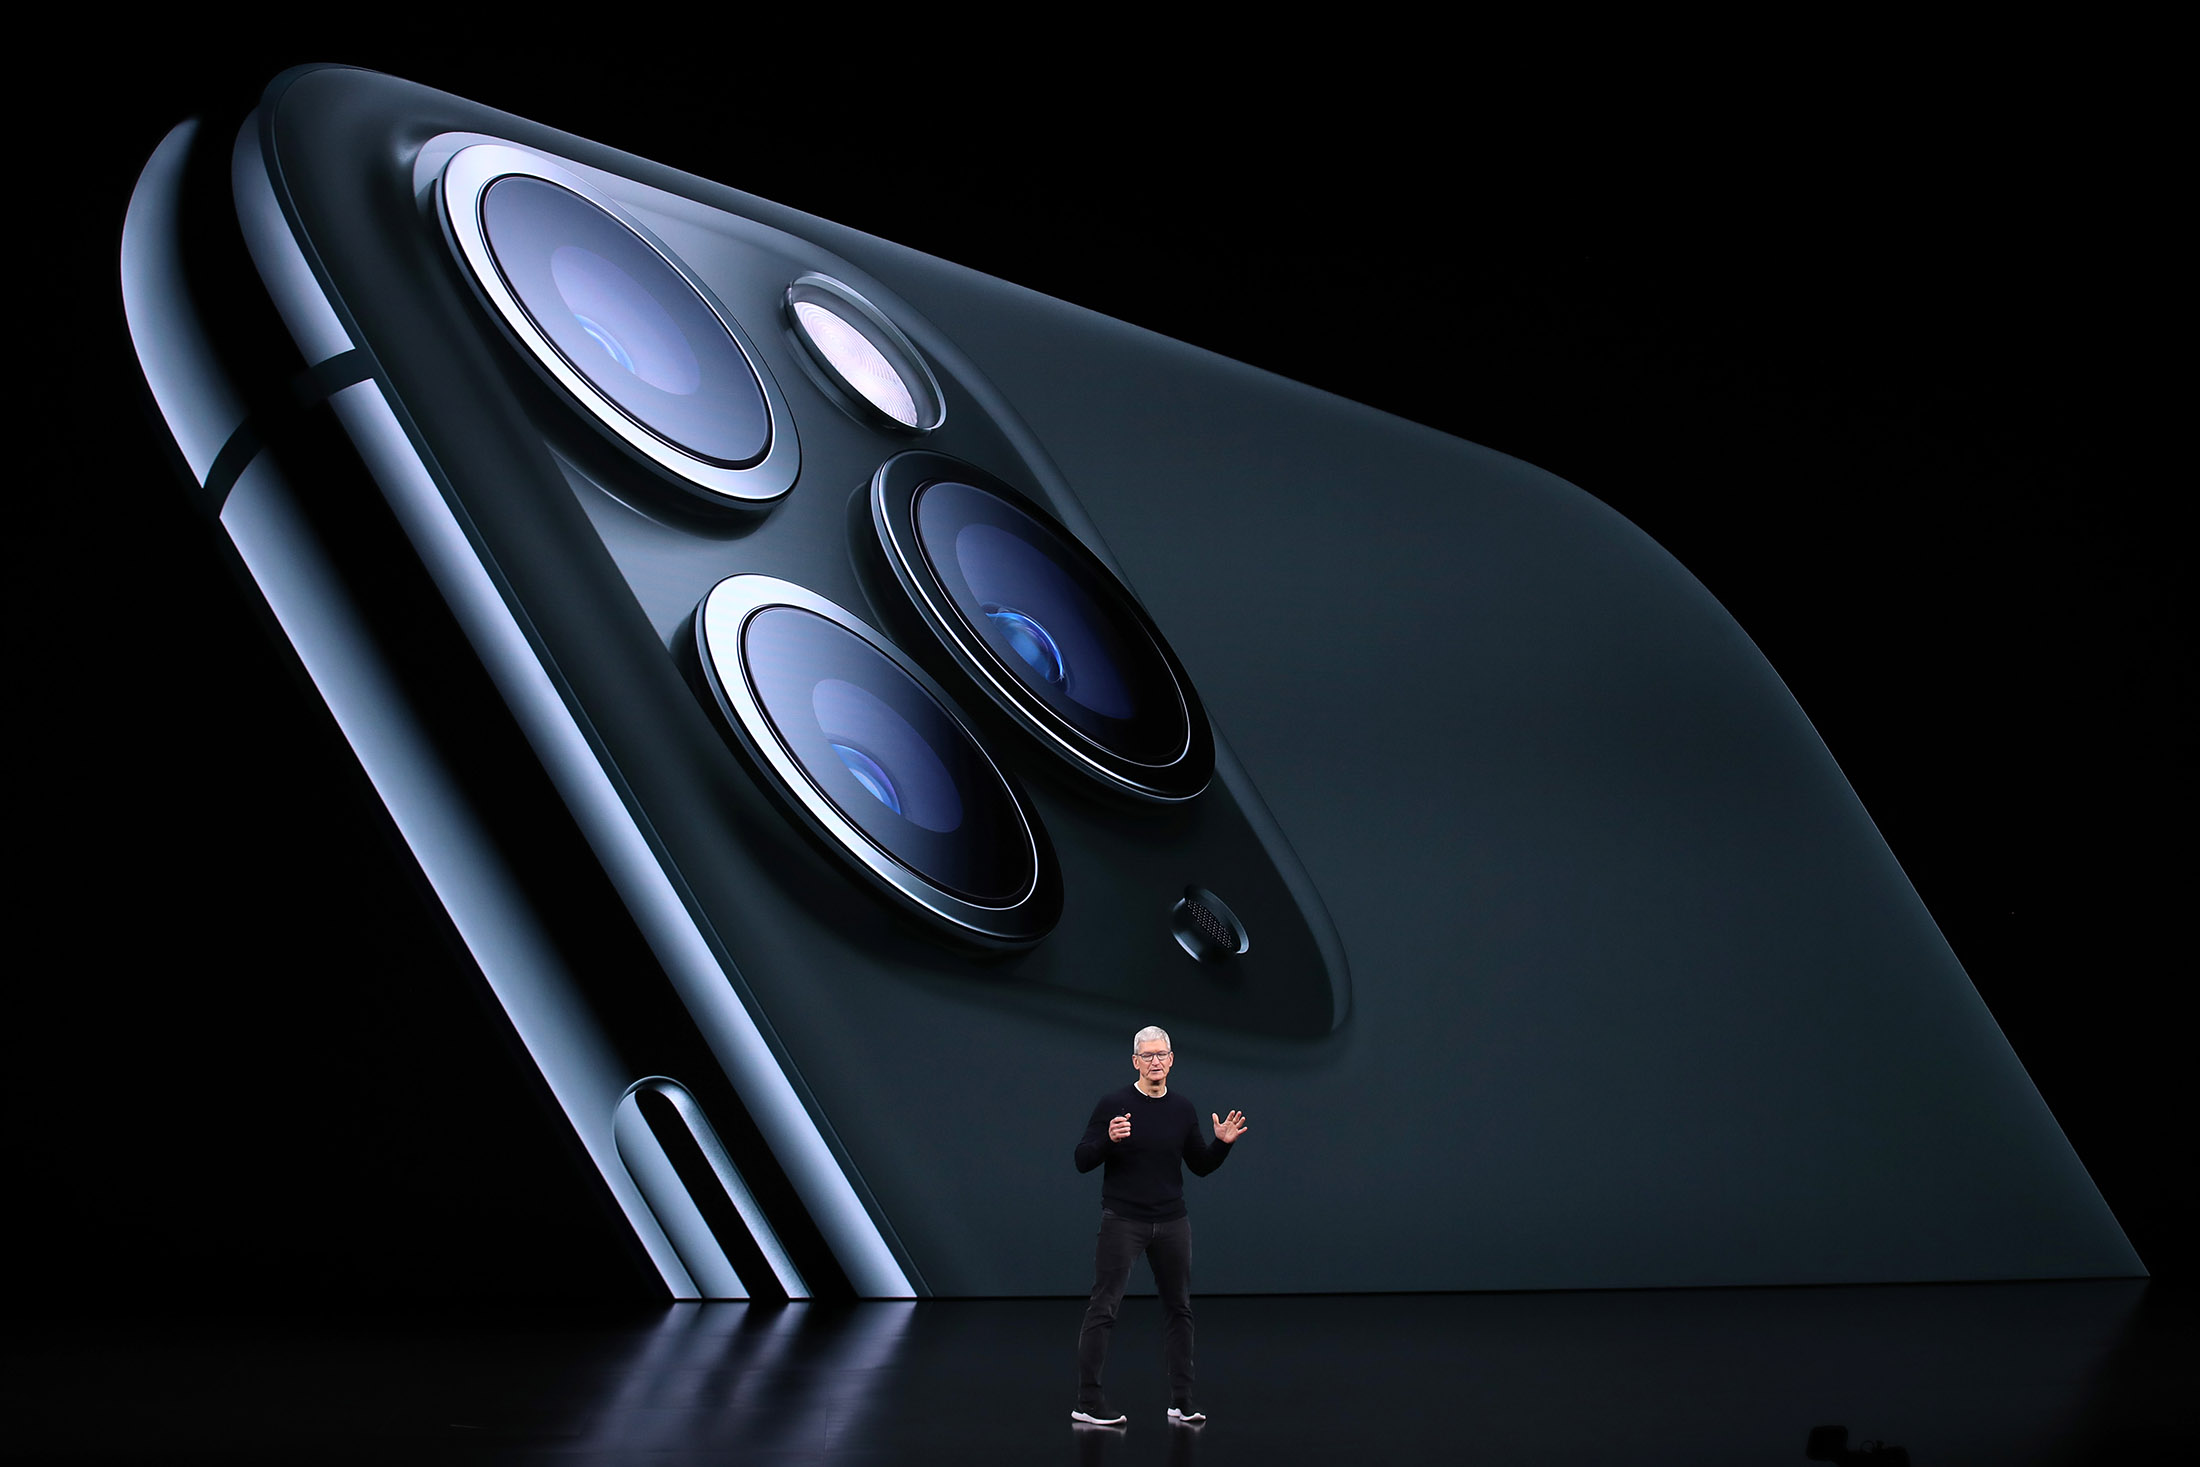 Apple CEO Tim Cook speaks during a product launch event at the company’s headquarters in Cupertino, Calif., on Sept. 10, 2019.